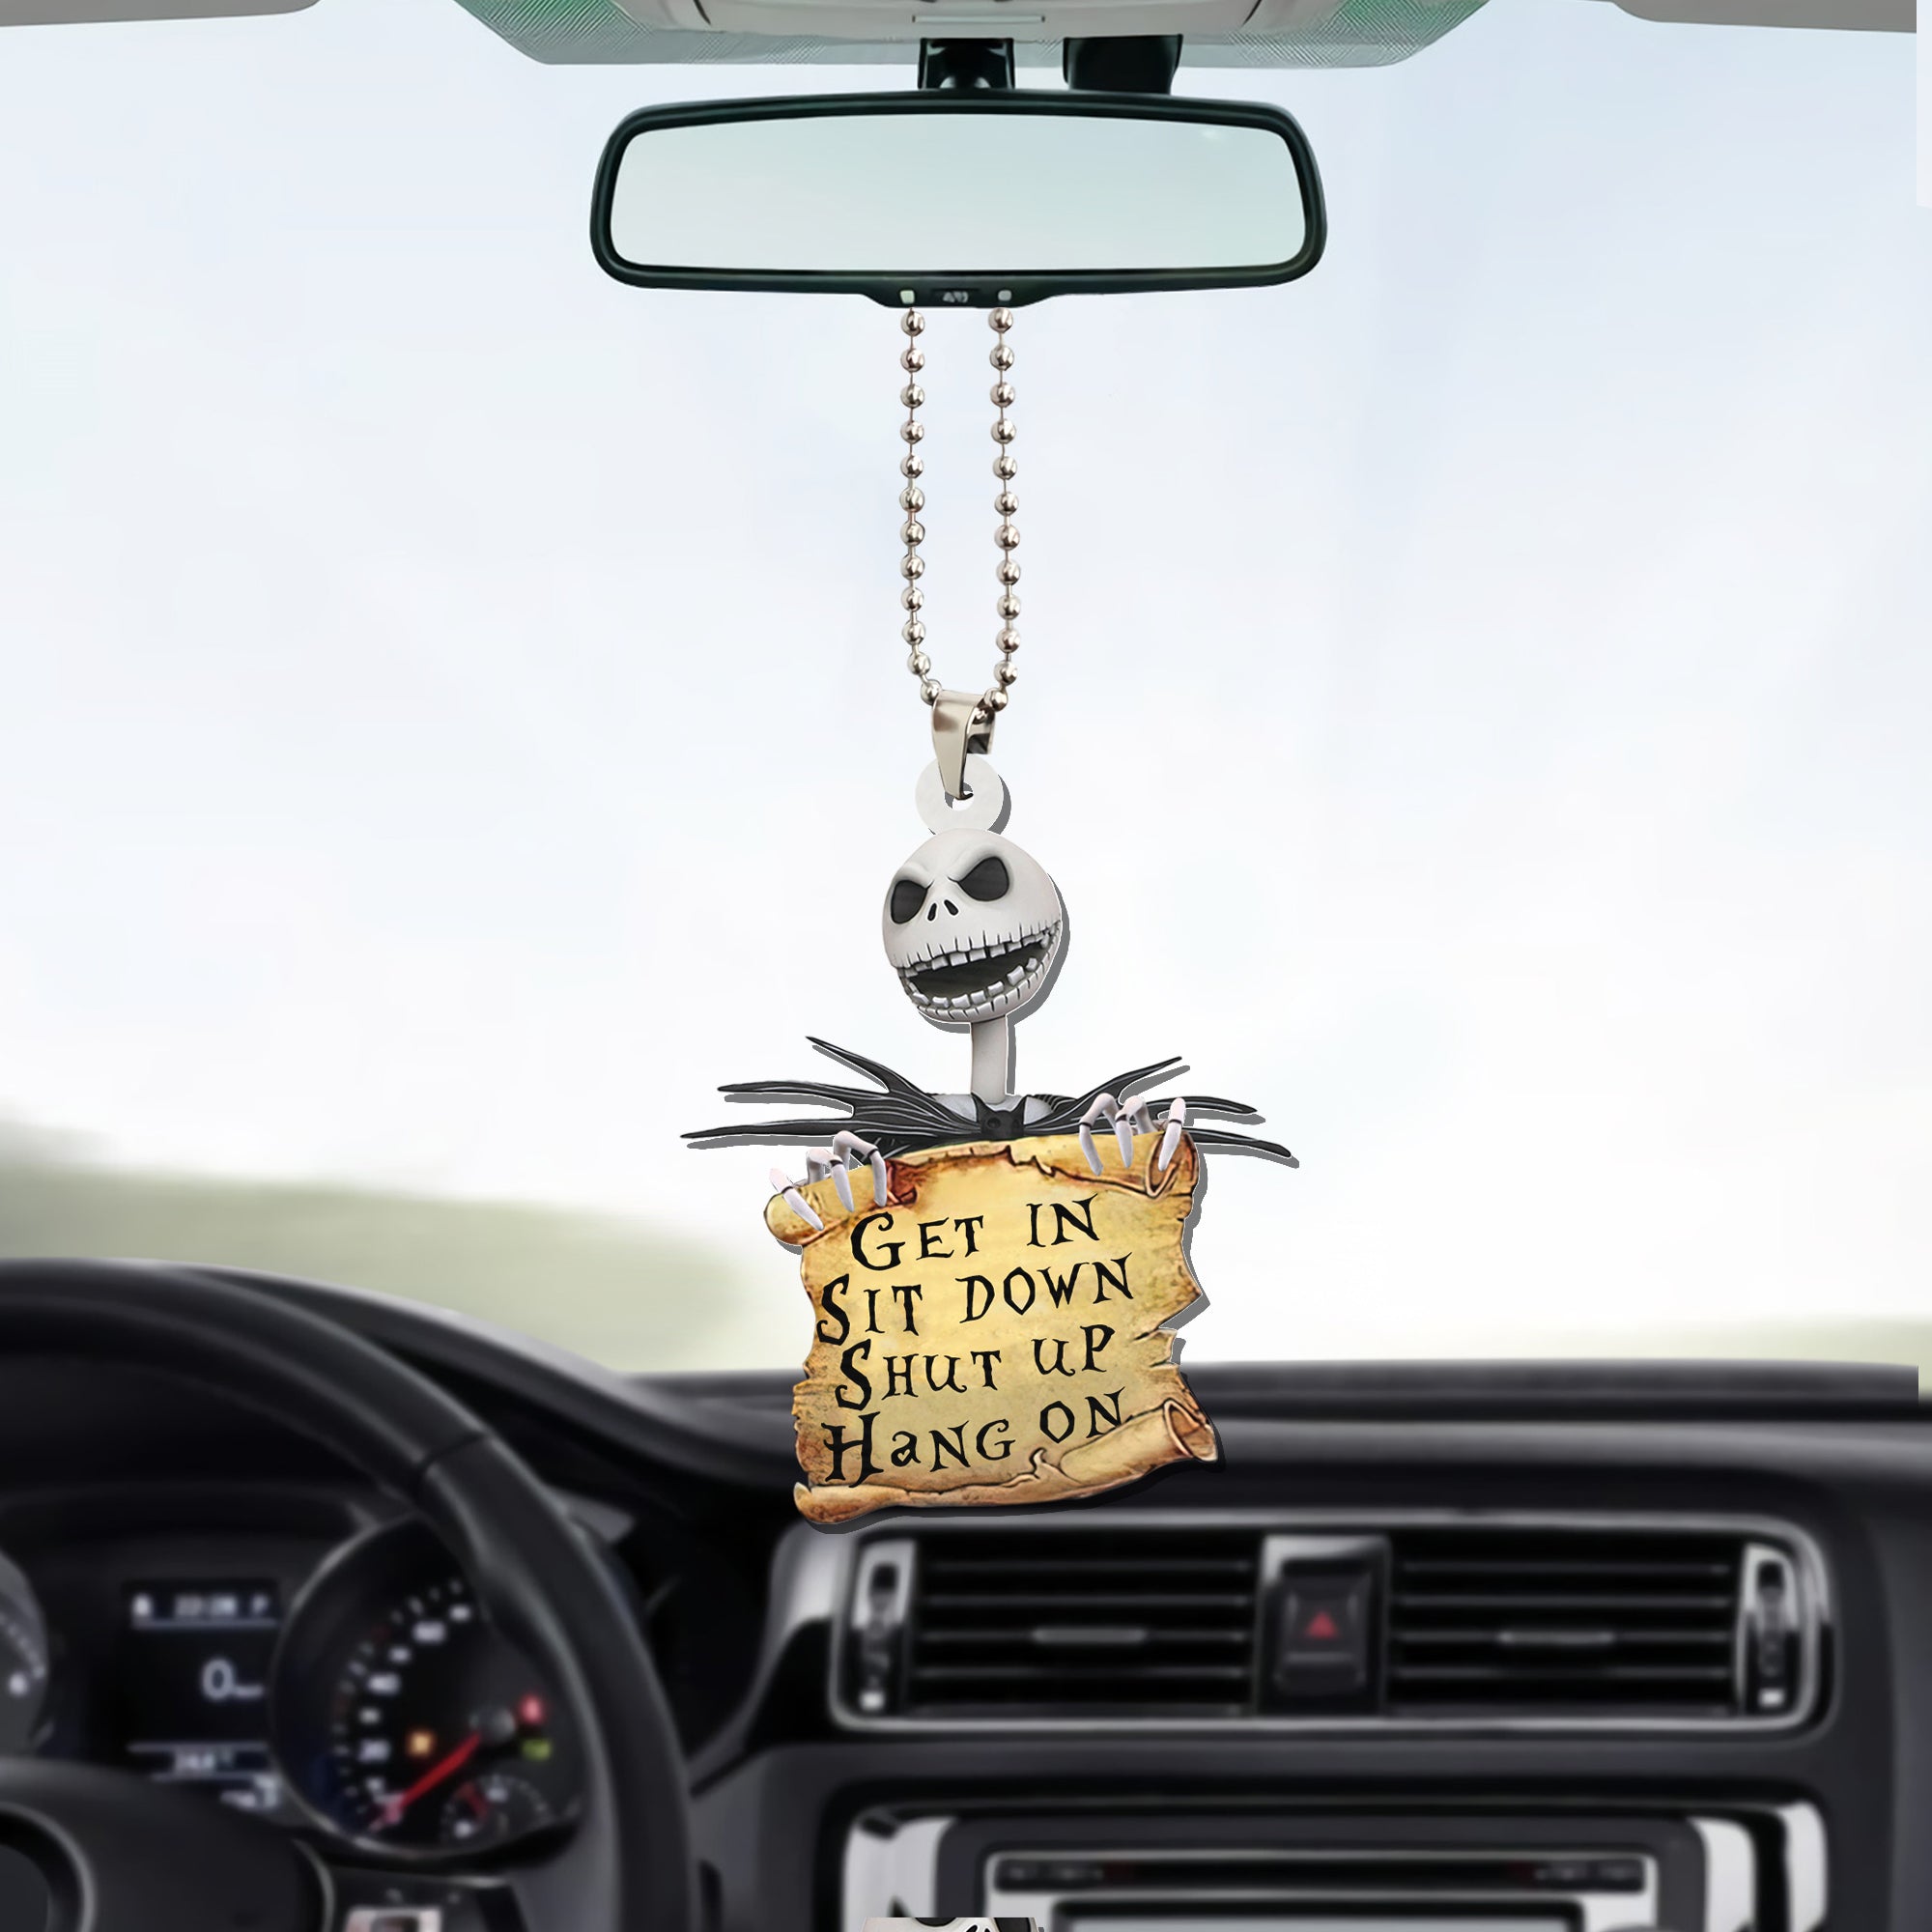 Get In Sit Down Shut Up Hold On Jack Nightmare Before Christmas Car Ornament Custom Car Accessories Decorations Nearkii